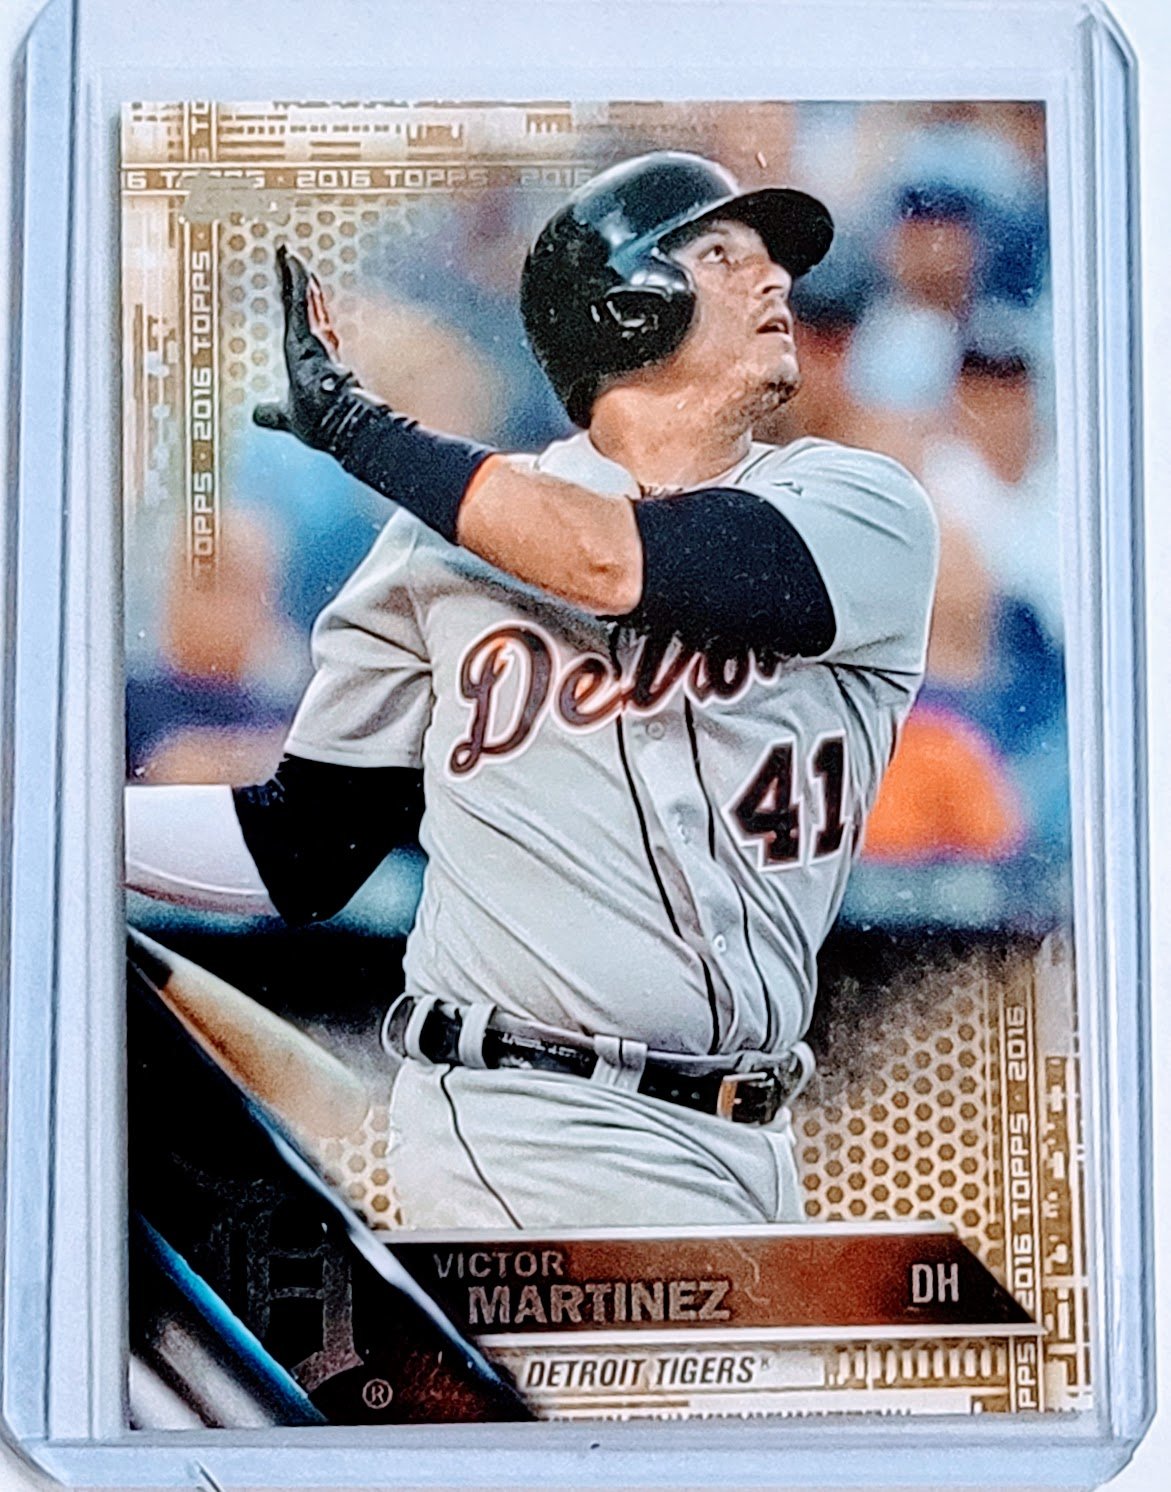 2016 Topps Victor Martinez Gold #'d/2016 Parallel Baseball Card TPTV simple Xclusive Collectibles   